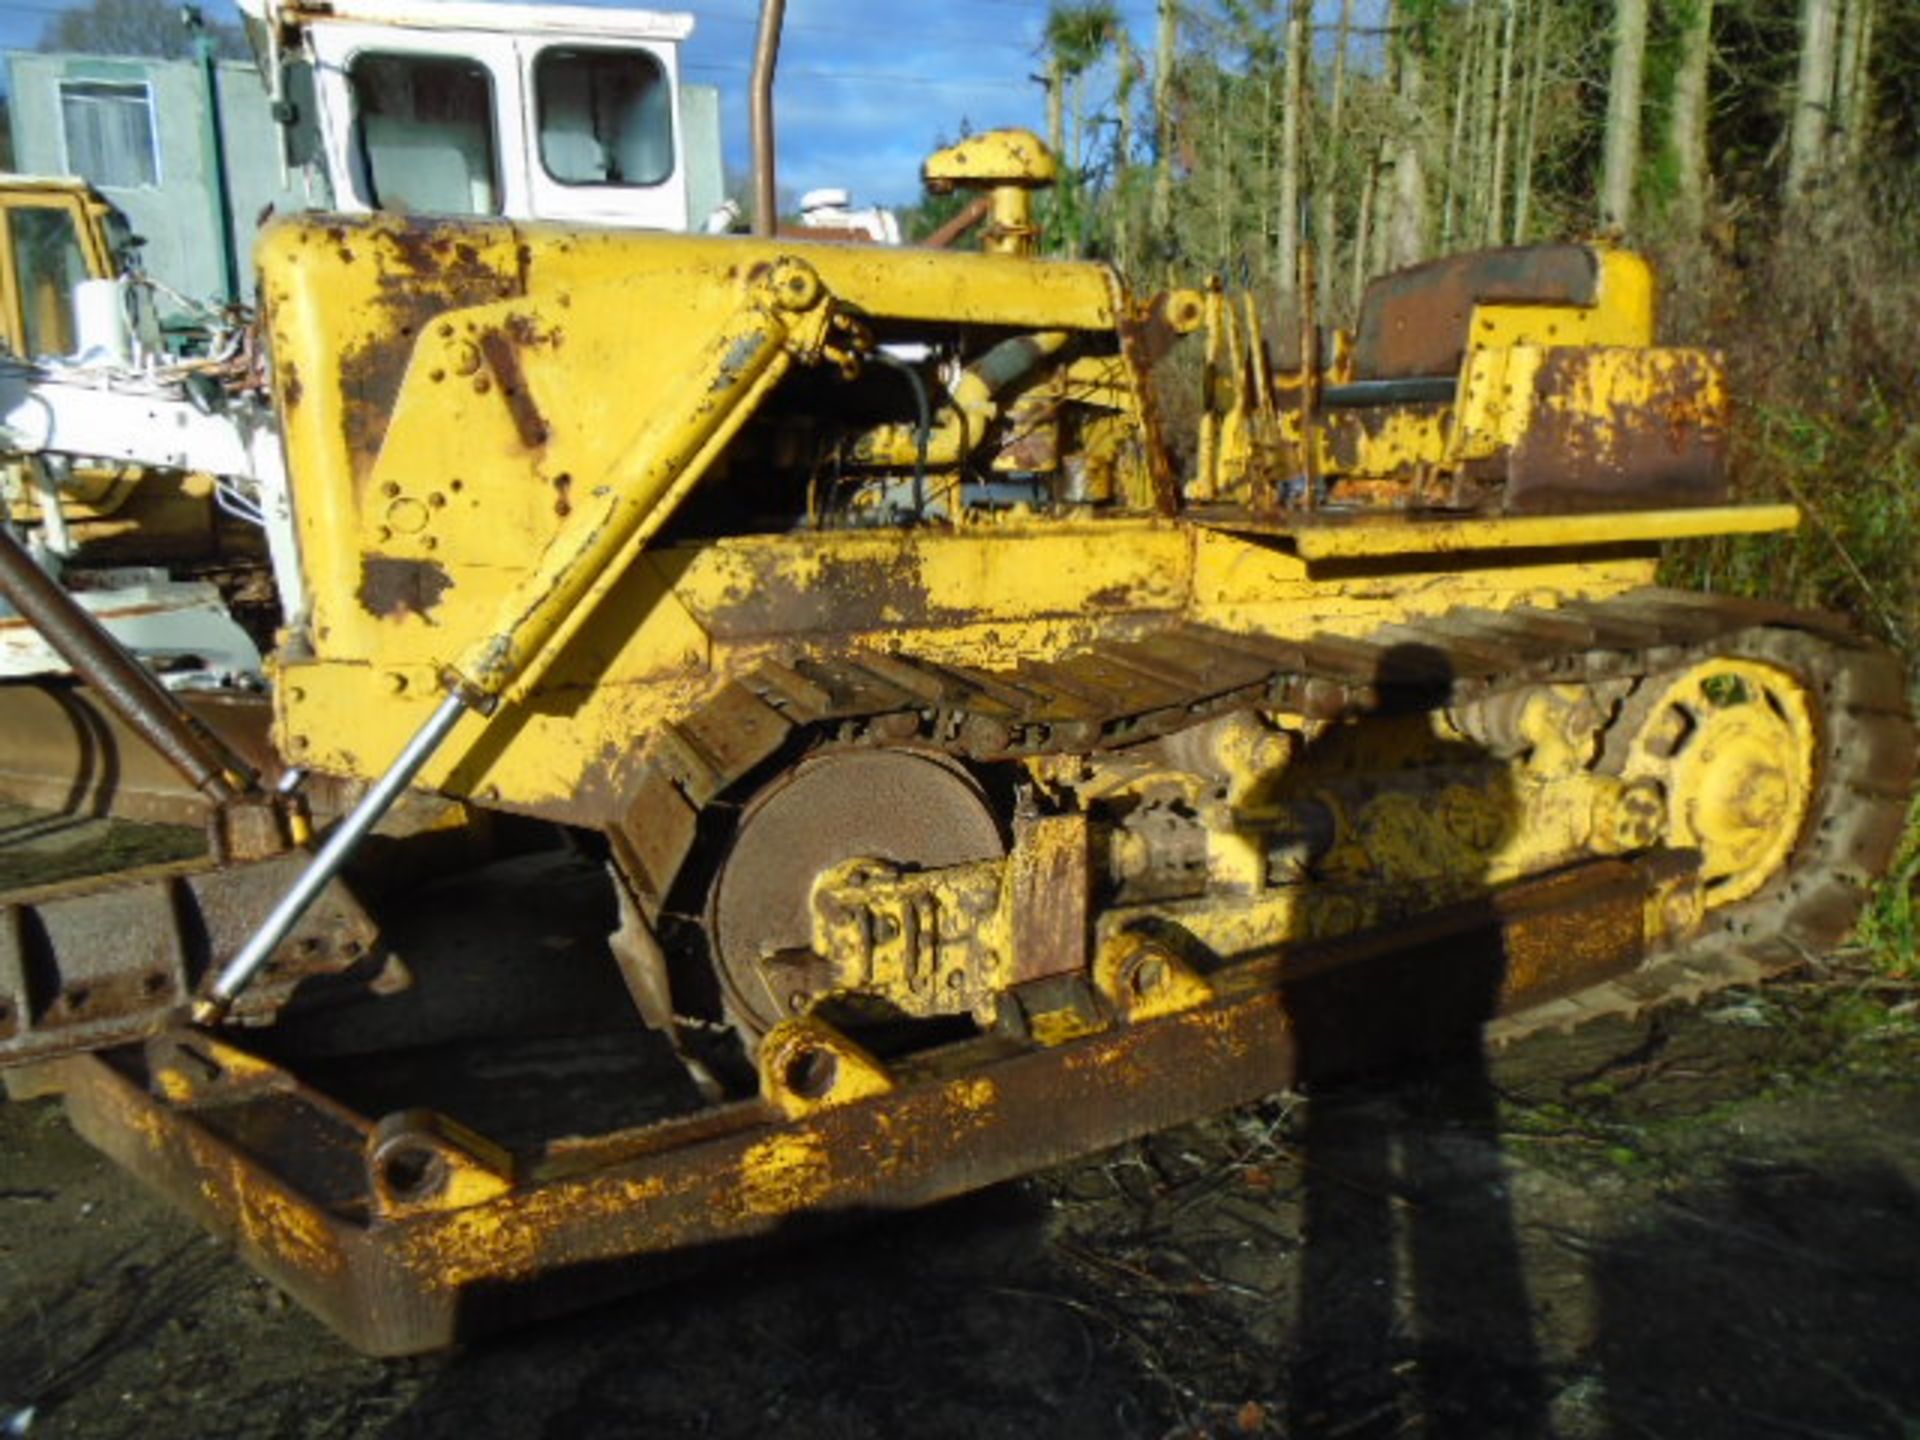 VINTAGE FOWLER CHALLENGER 33 dozer D6 size (early mid 60's) - Image 2 of 8